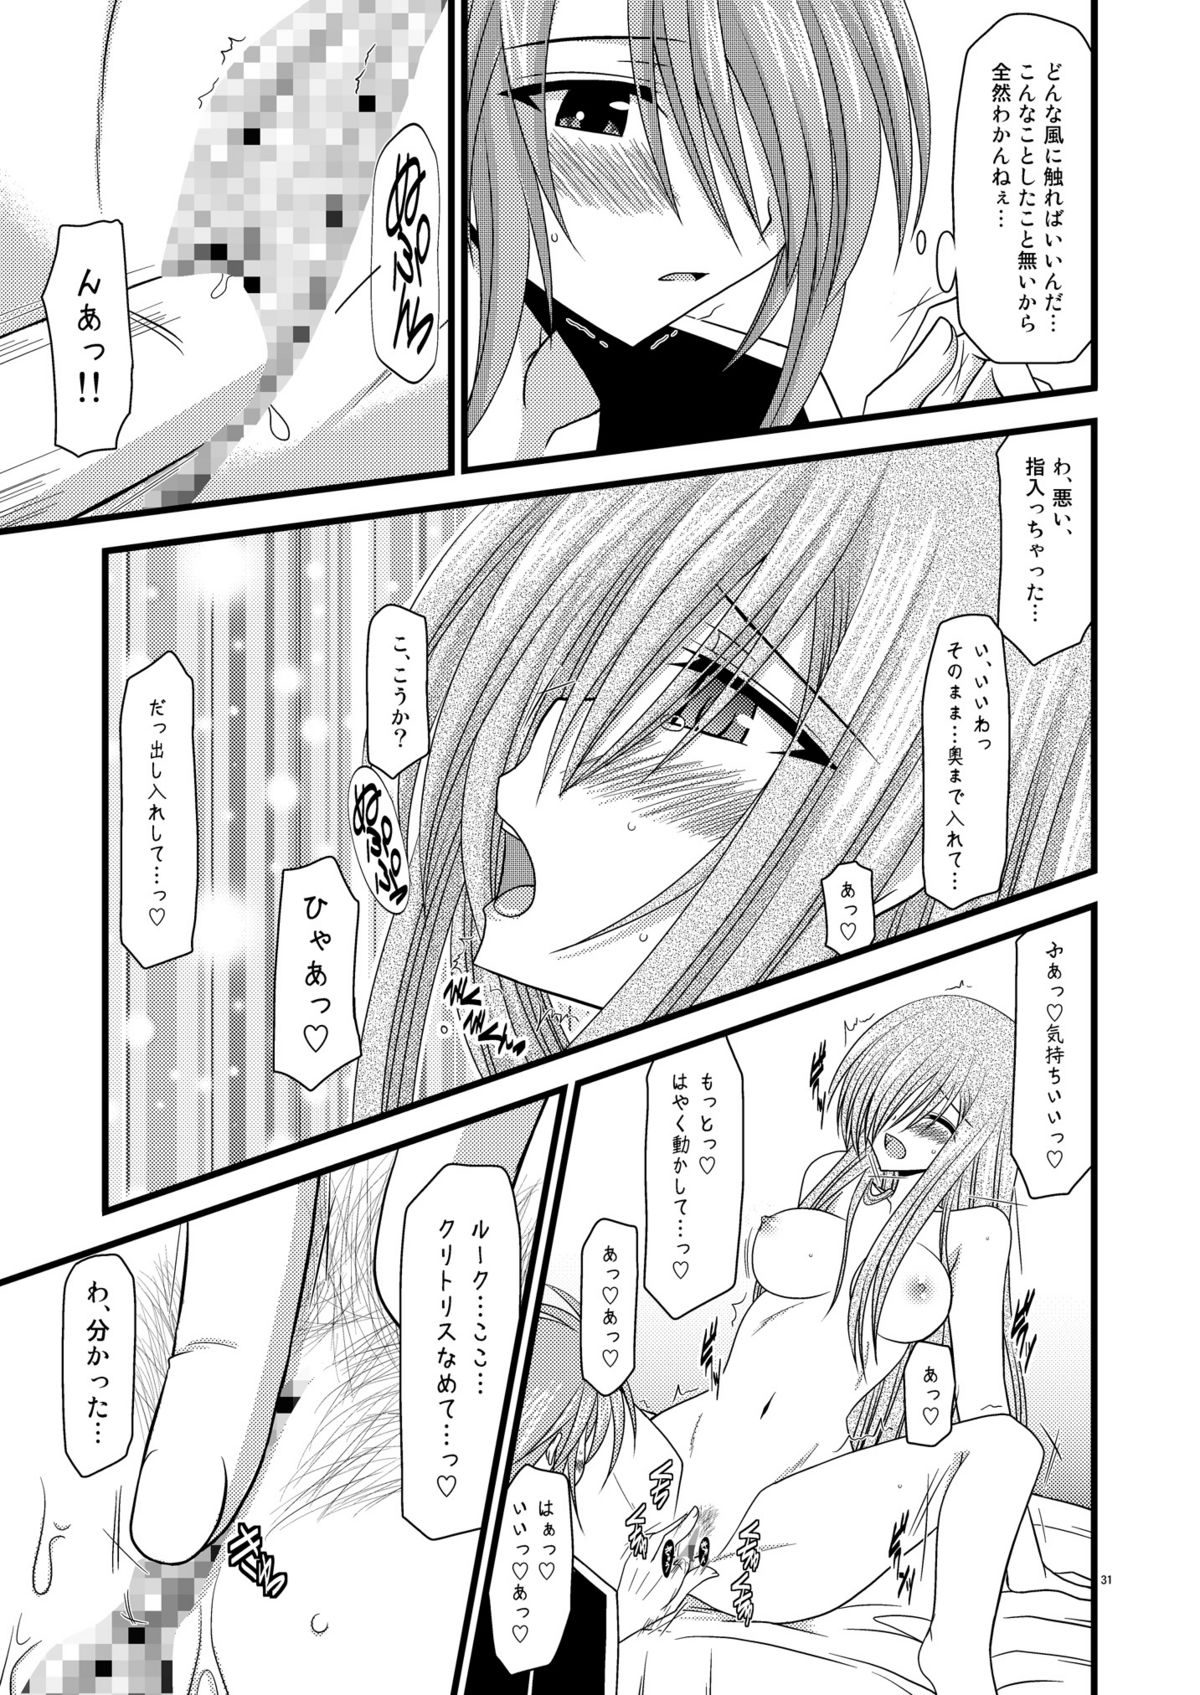 (SC41) [valssu] Melon Niku Bittake! V -the last- (Tales of the Abyss) page 31 full